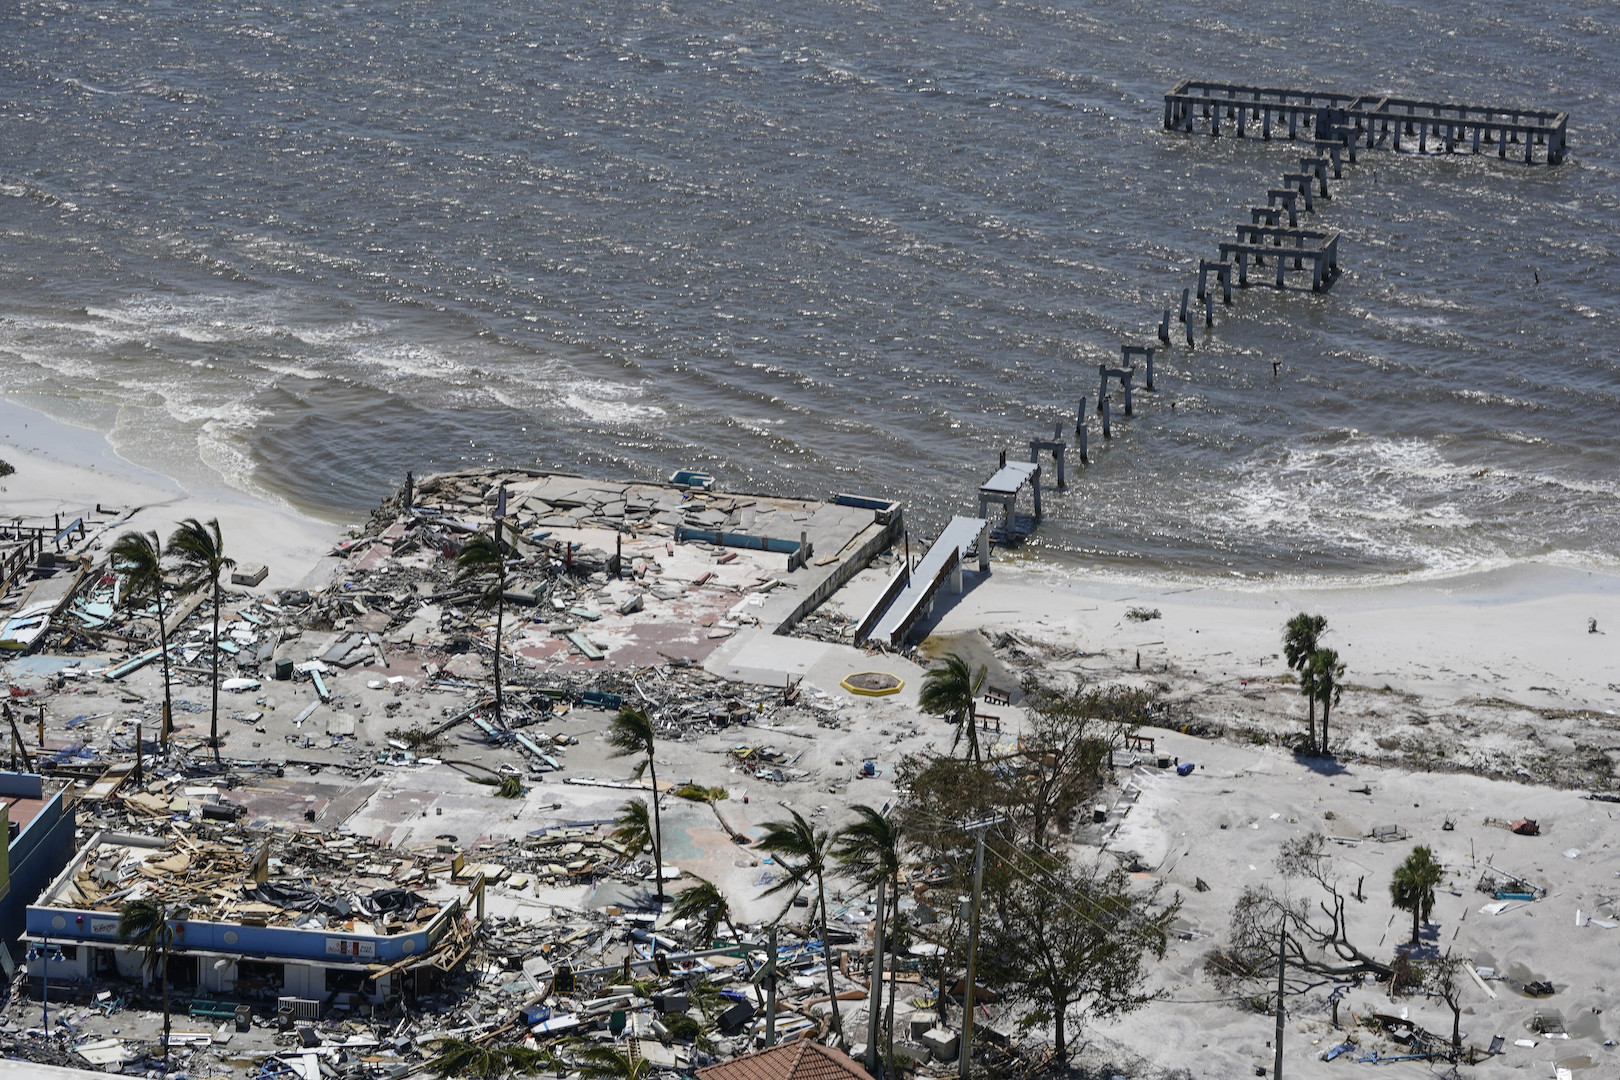 Haunting aerial images show Hurricane Ian's aftermath in Fort Myers